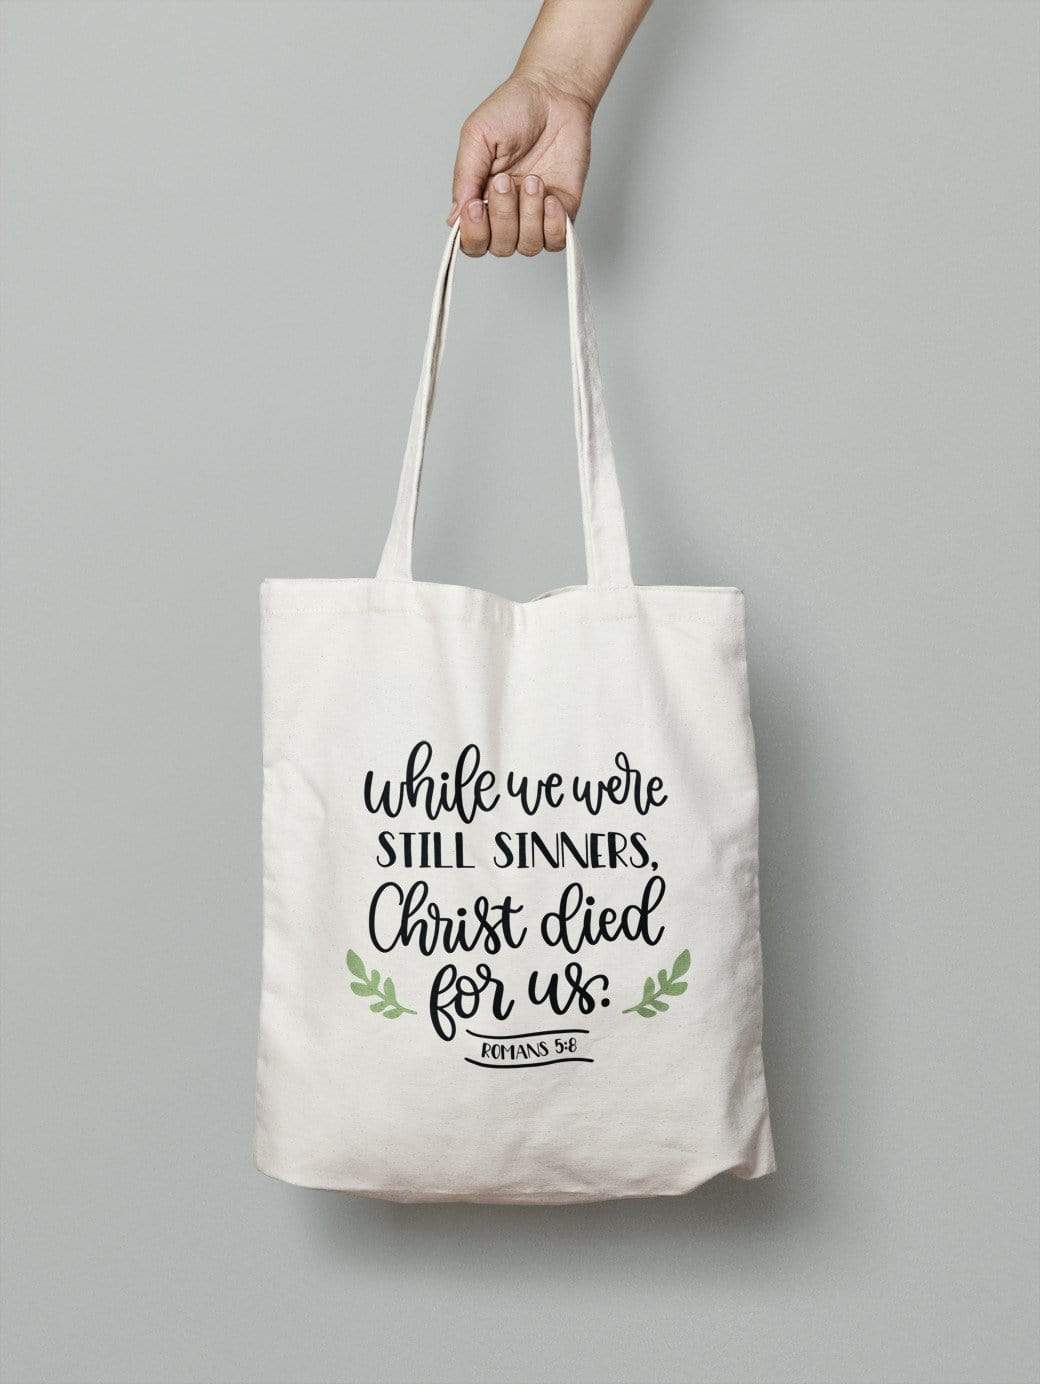 Christ Died for Us - Tote Bag, 100% Cotton, Zipper Handle